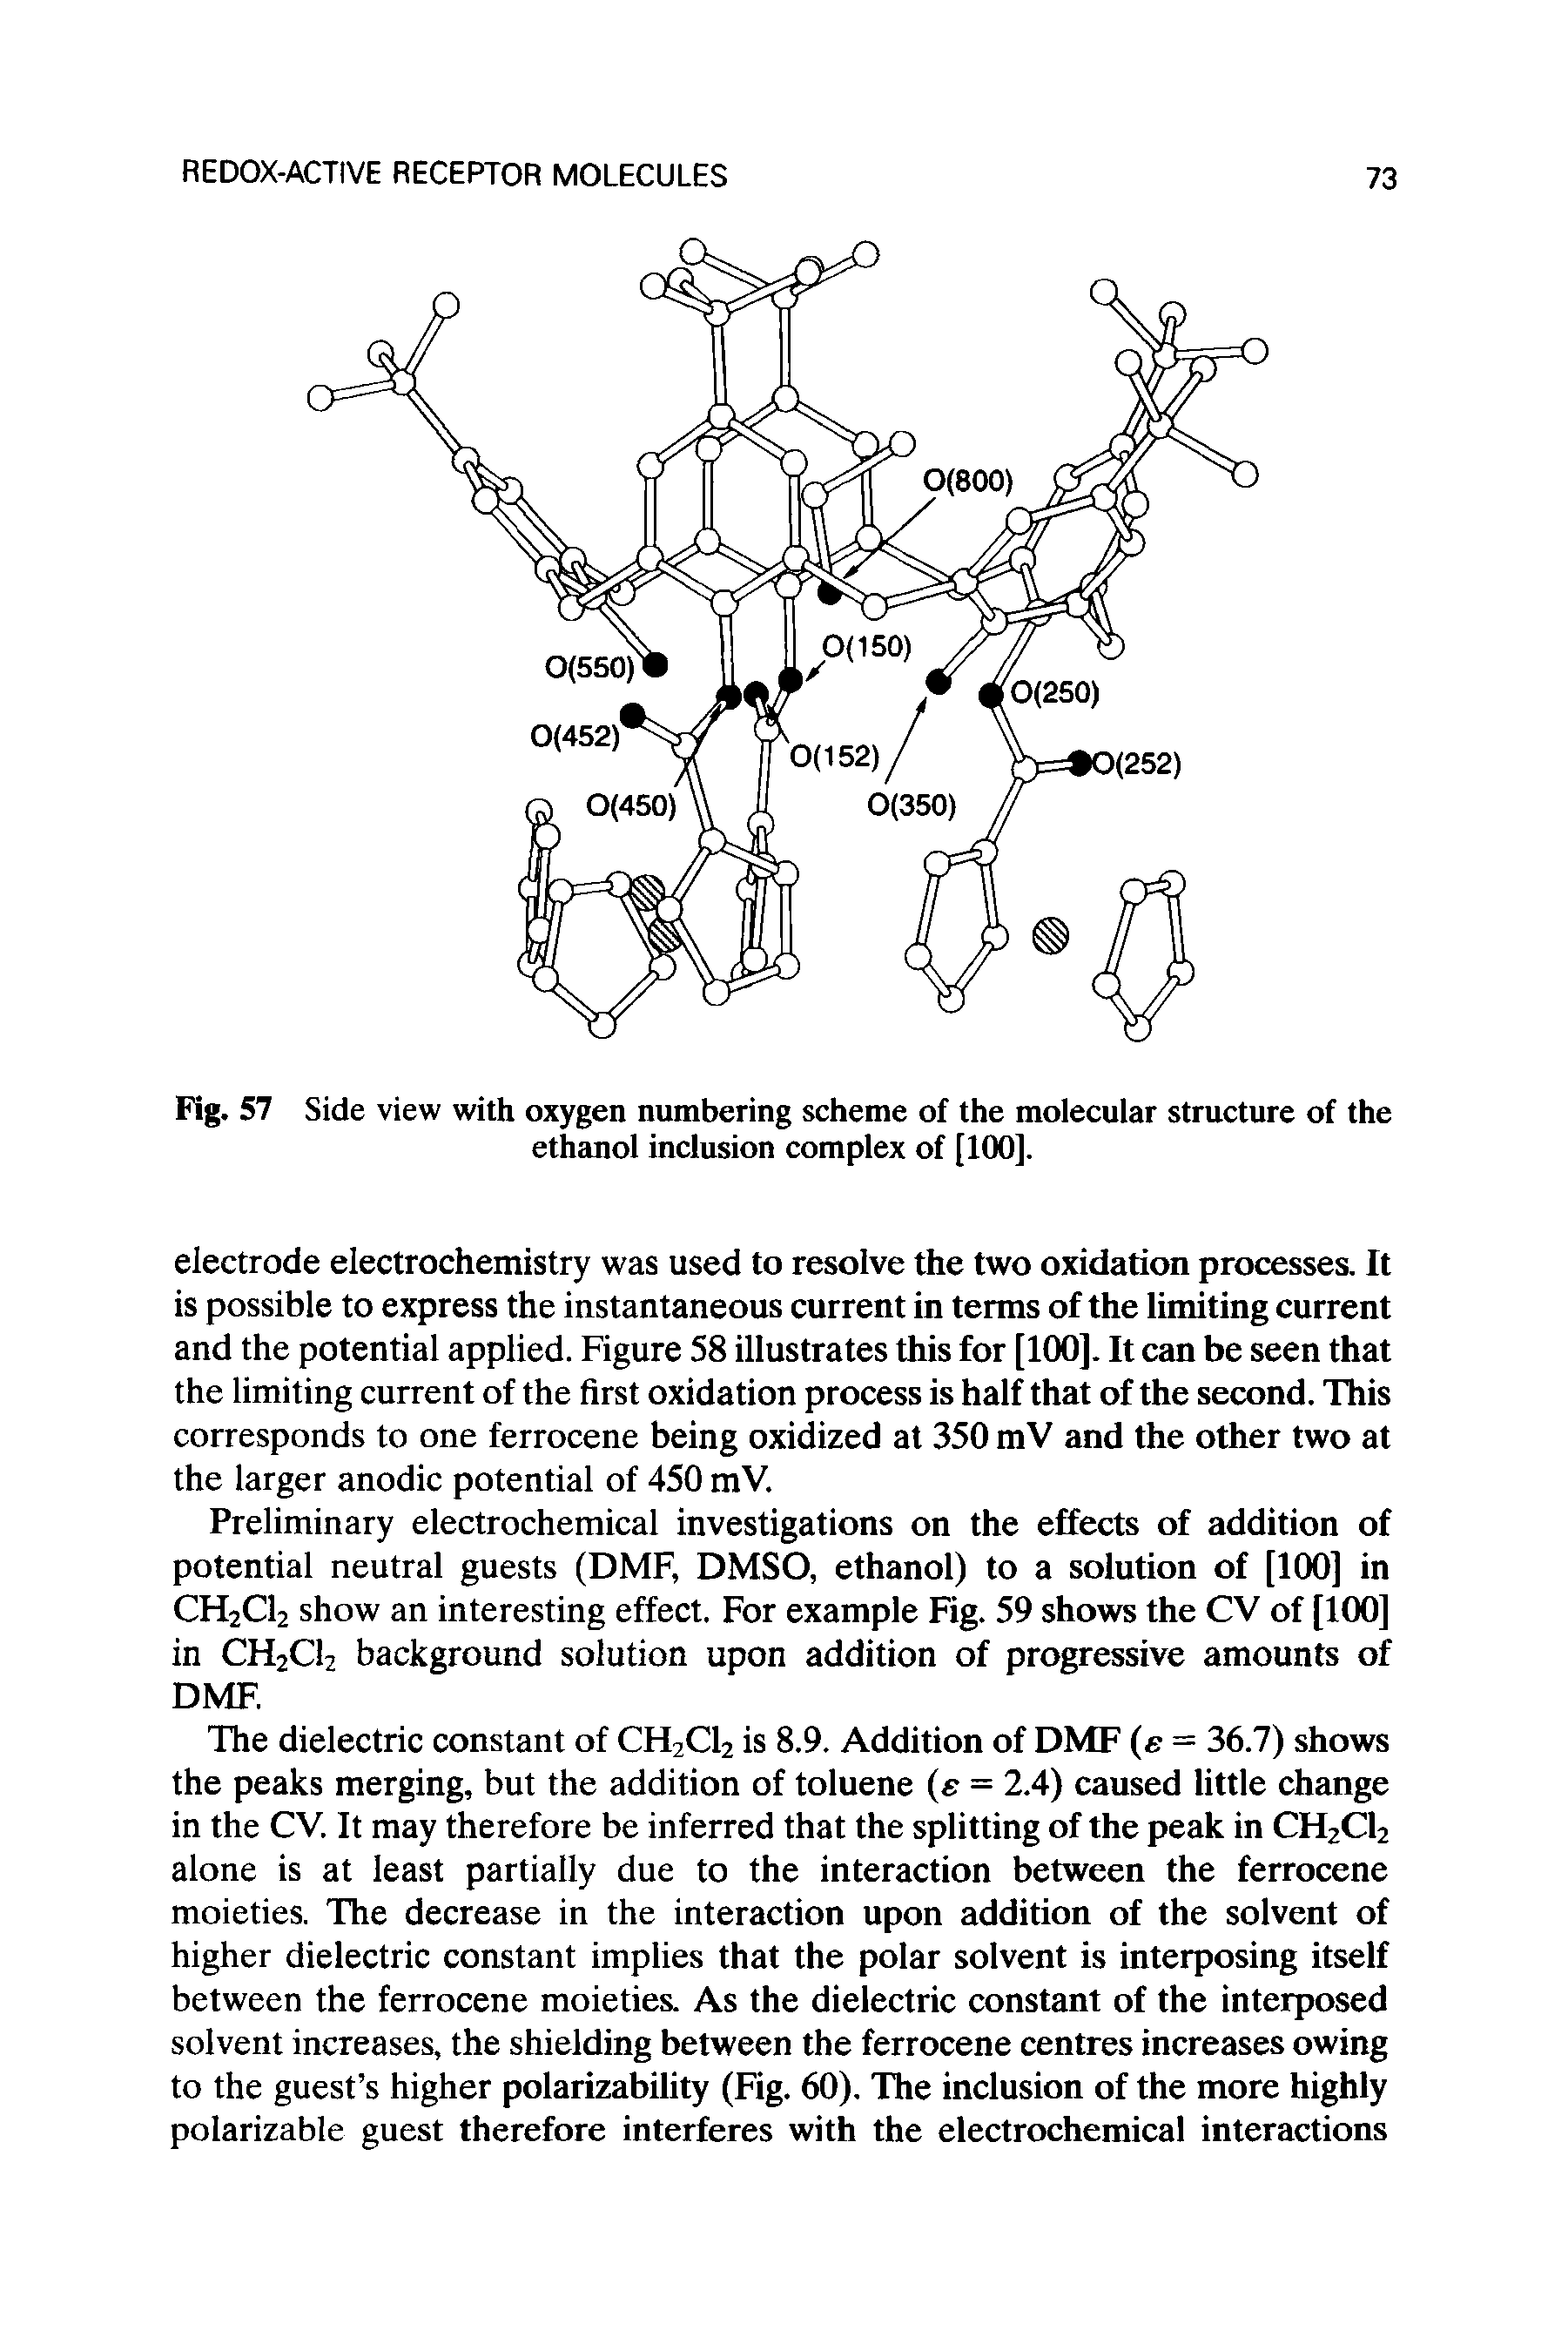 Fig. 57 Side view with oxygen numbering scheme of the molecular structure of the ethanol inclusion complex of [100].